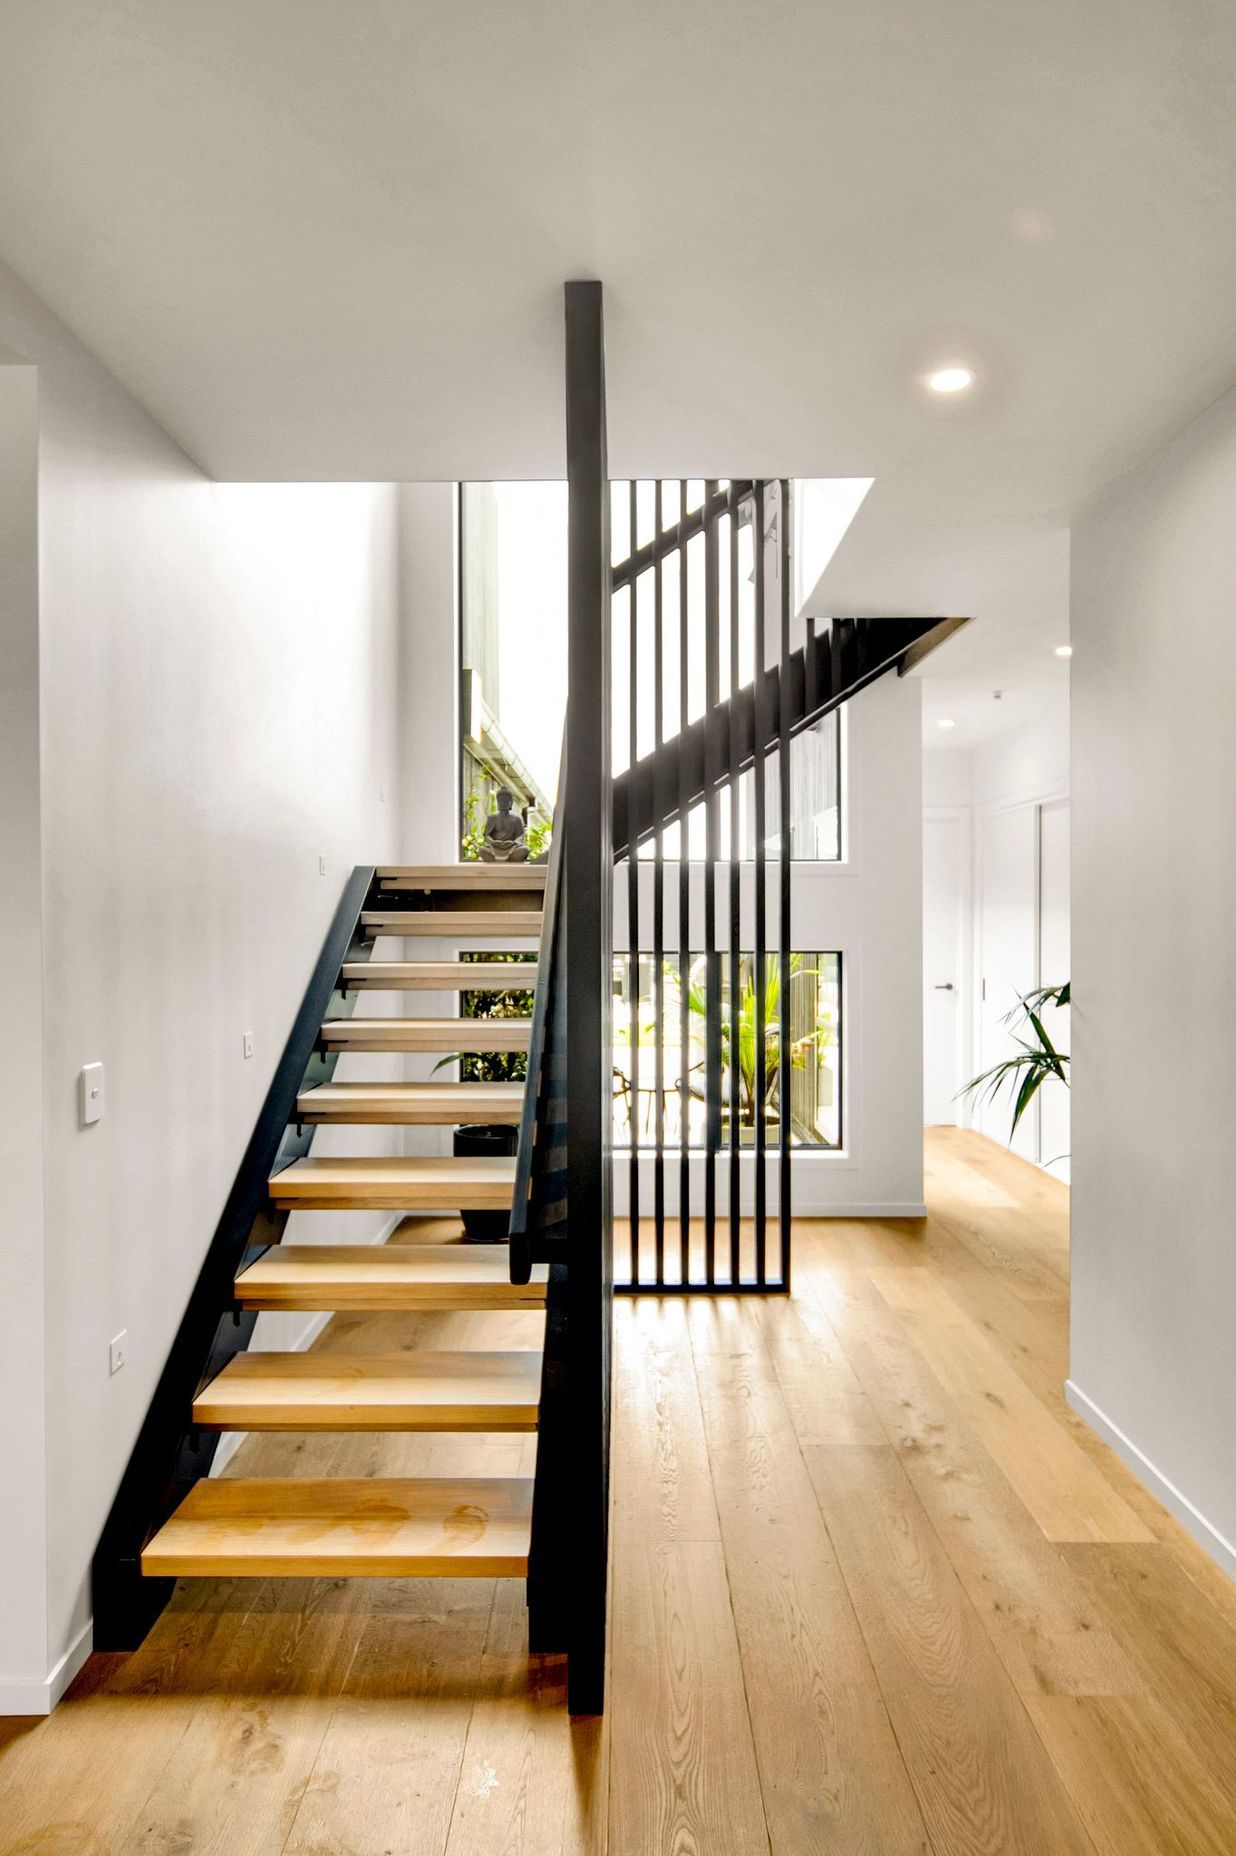 American oak stair treads pair with steel – a feature seen upon entering the home.